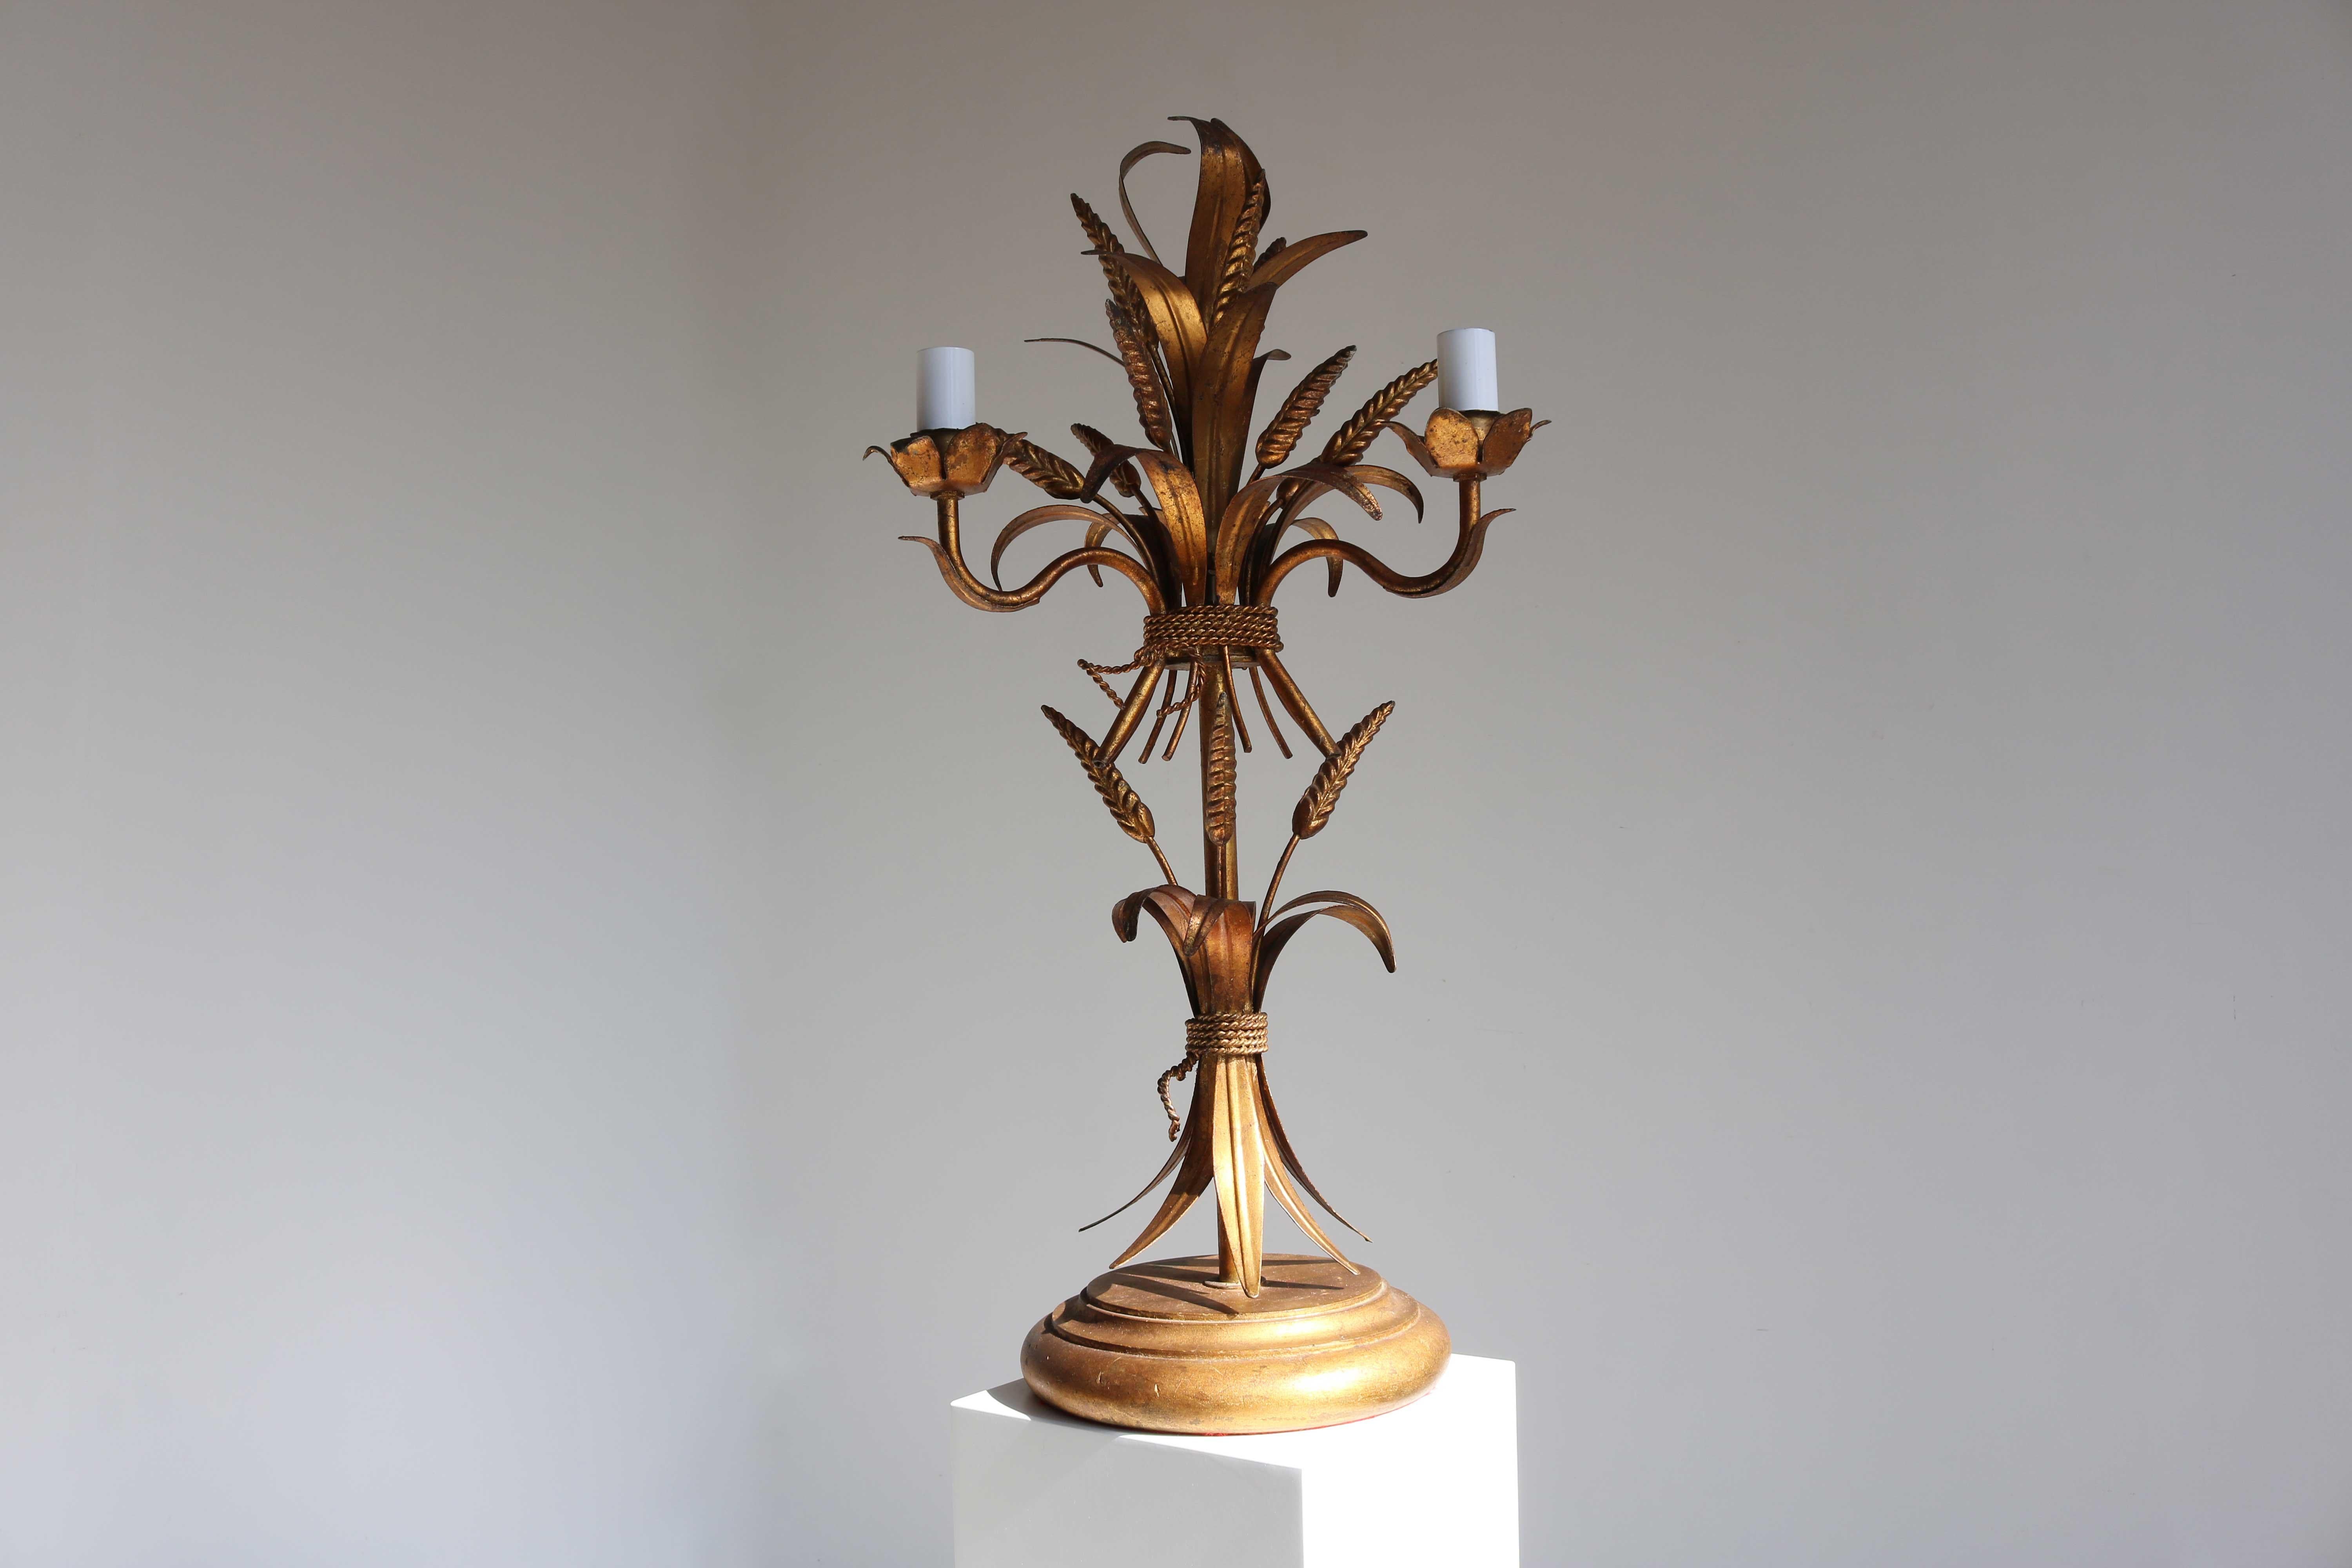 Gilt ‘Sheaf of Wheat’ Table Light, Florentine Table Lamp by Hans Kögl, 1960s For Sale 7